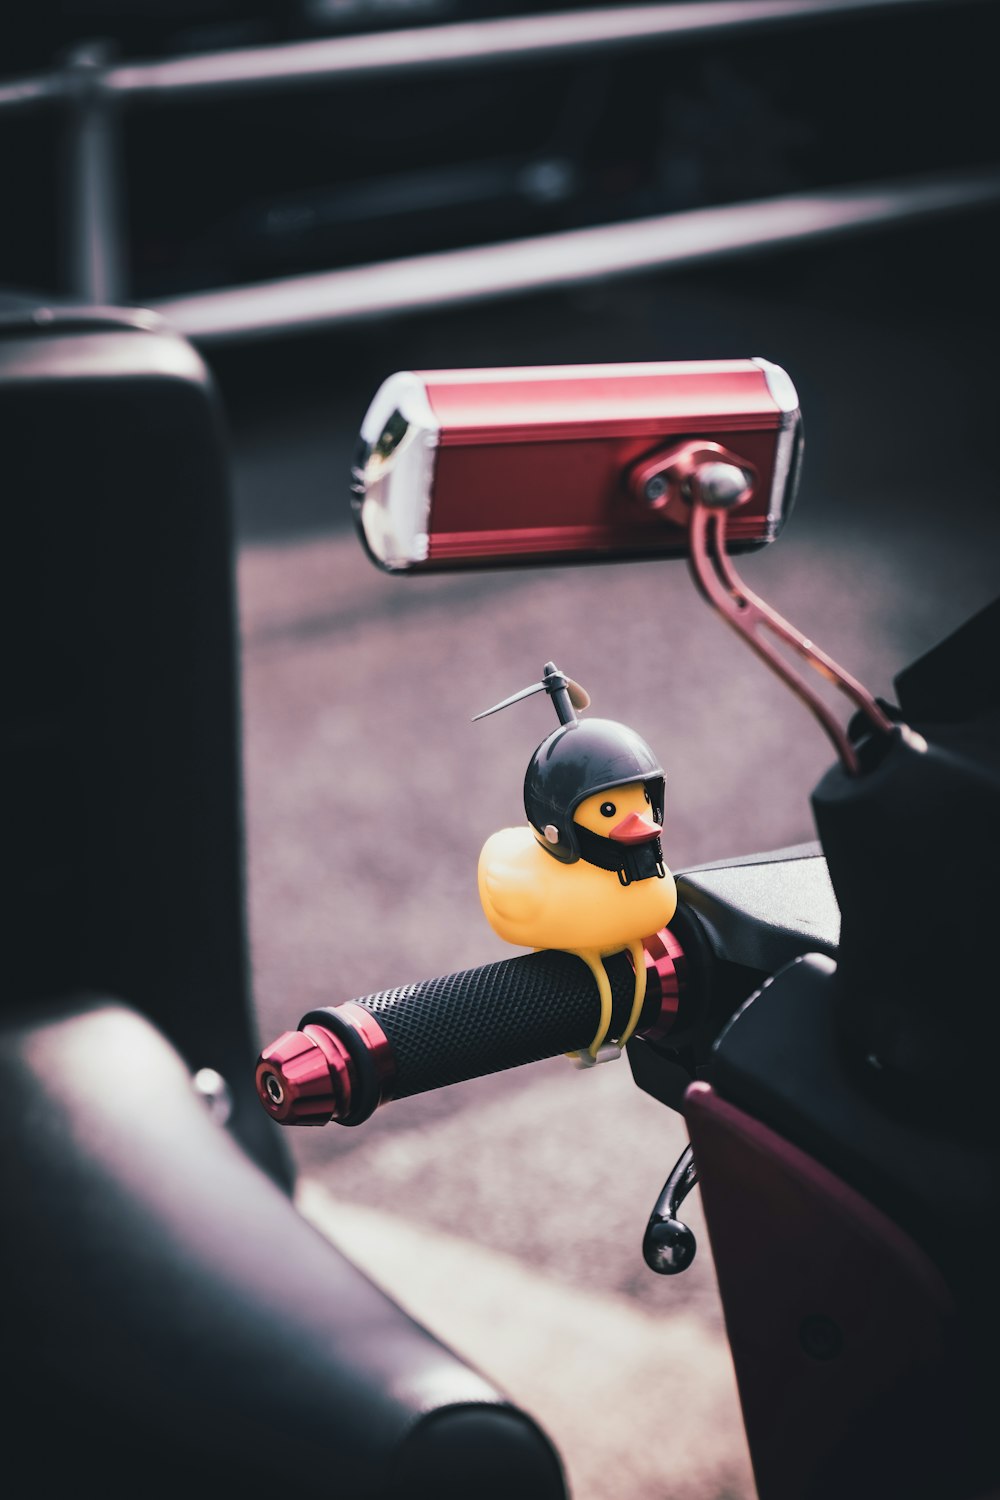 a close up of a motorcycle handlebar with a rubber duck on it